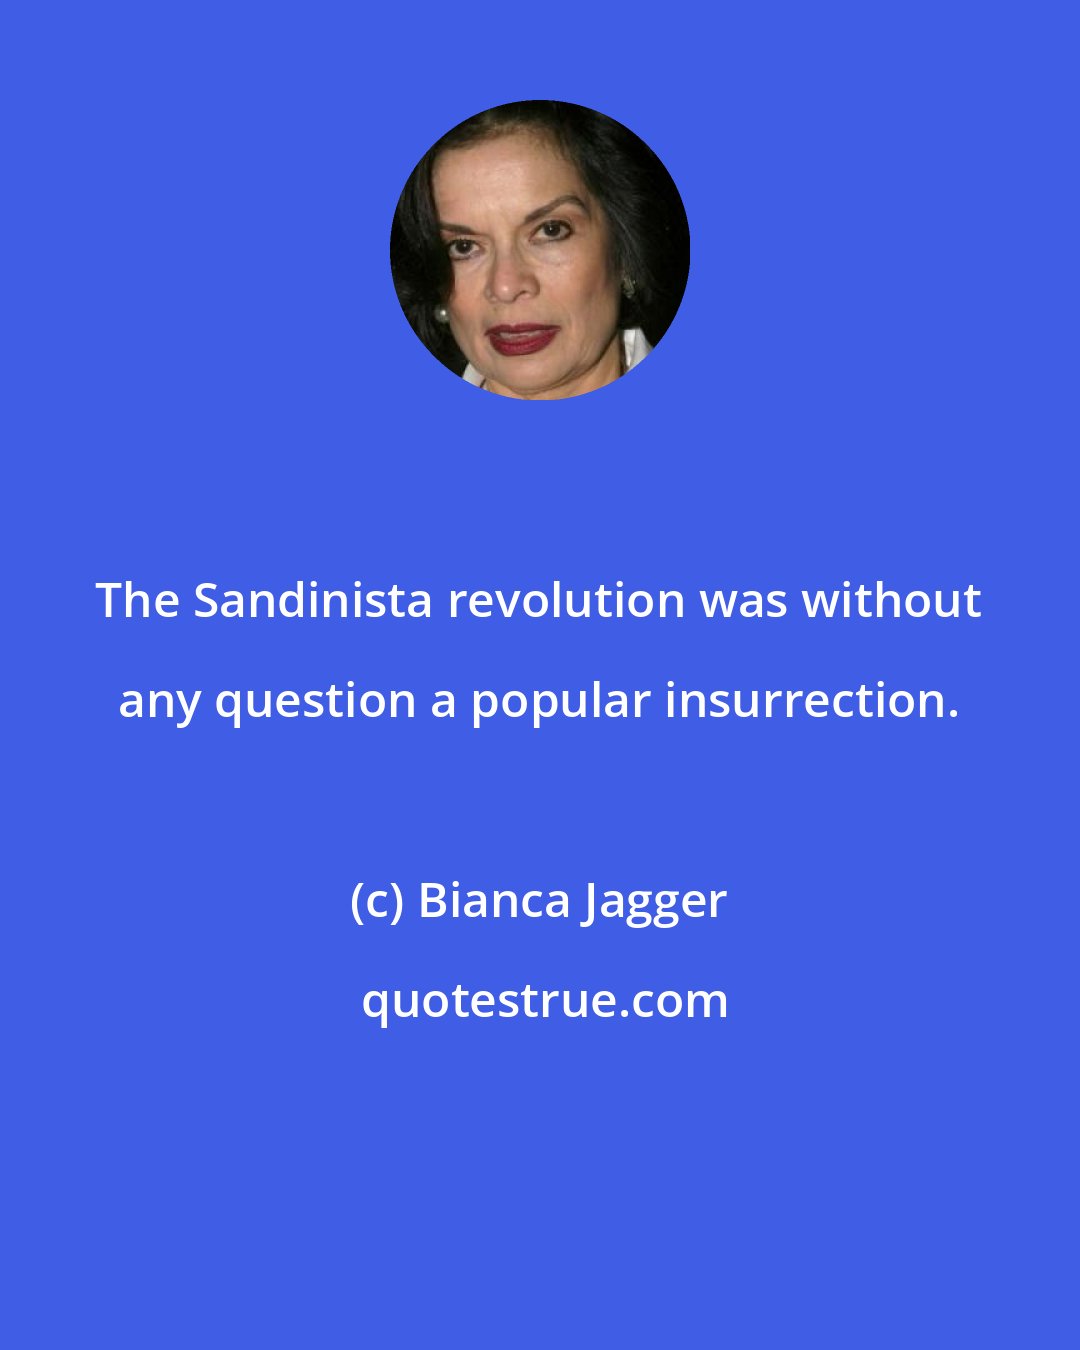 Bianca Jagger: The Sandinista revolution was without any question a popular insurrection.